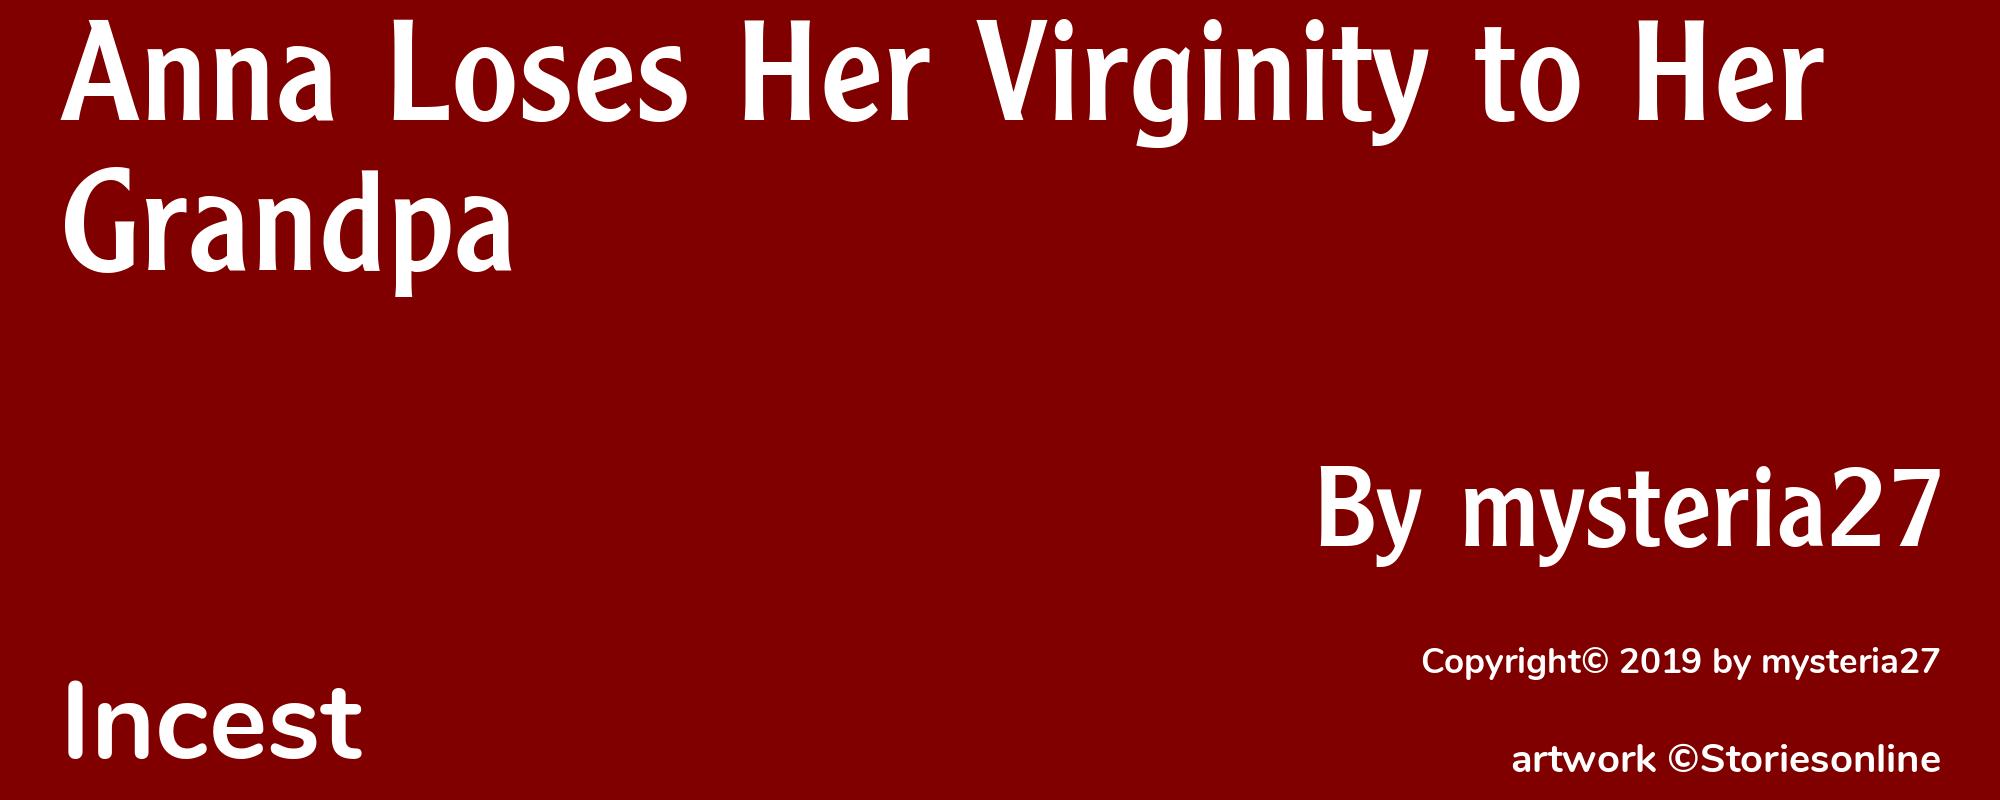 Anna Loses Her Virginity to Her Grandpa - Cover